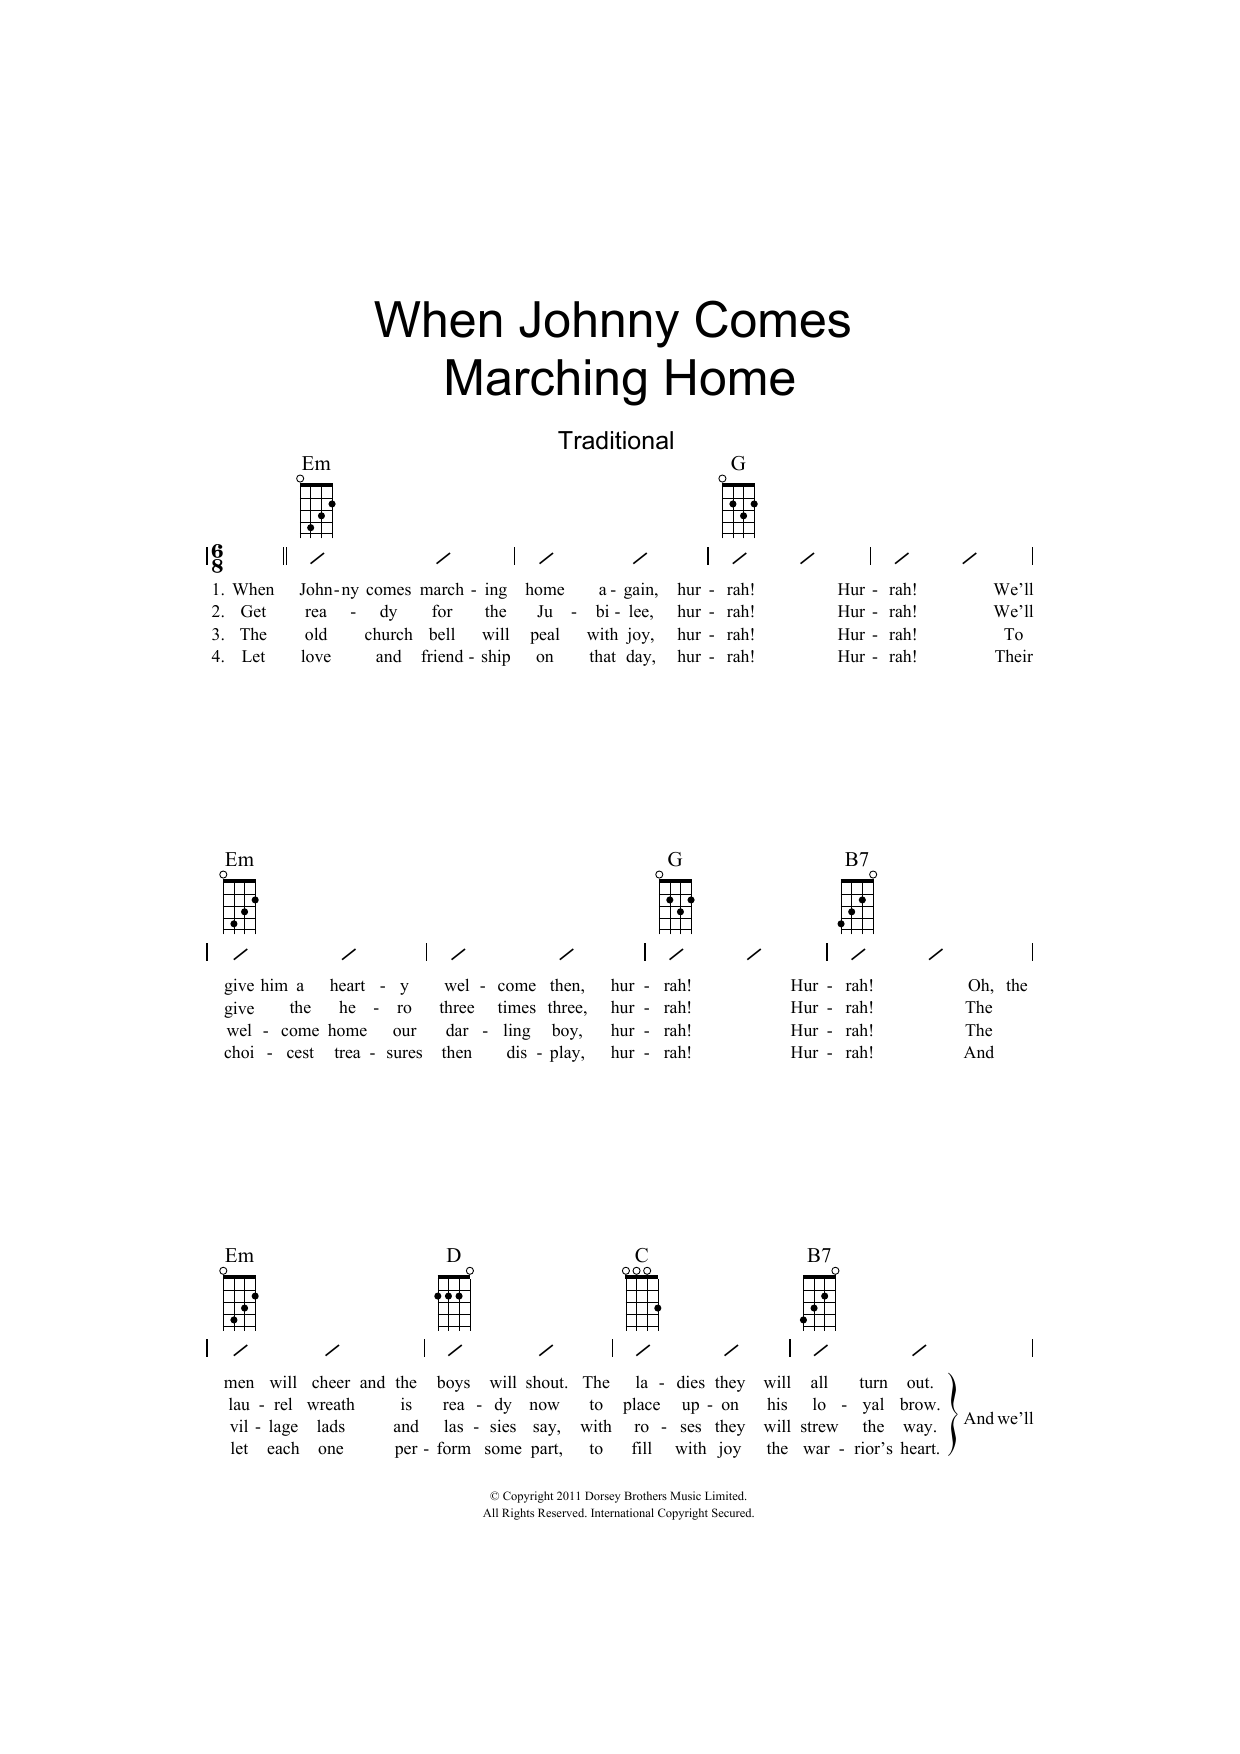 Download Traditional When Johnny Comes Marching Home Sheet Music